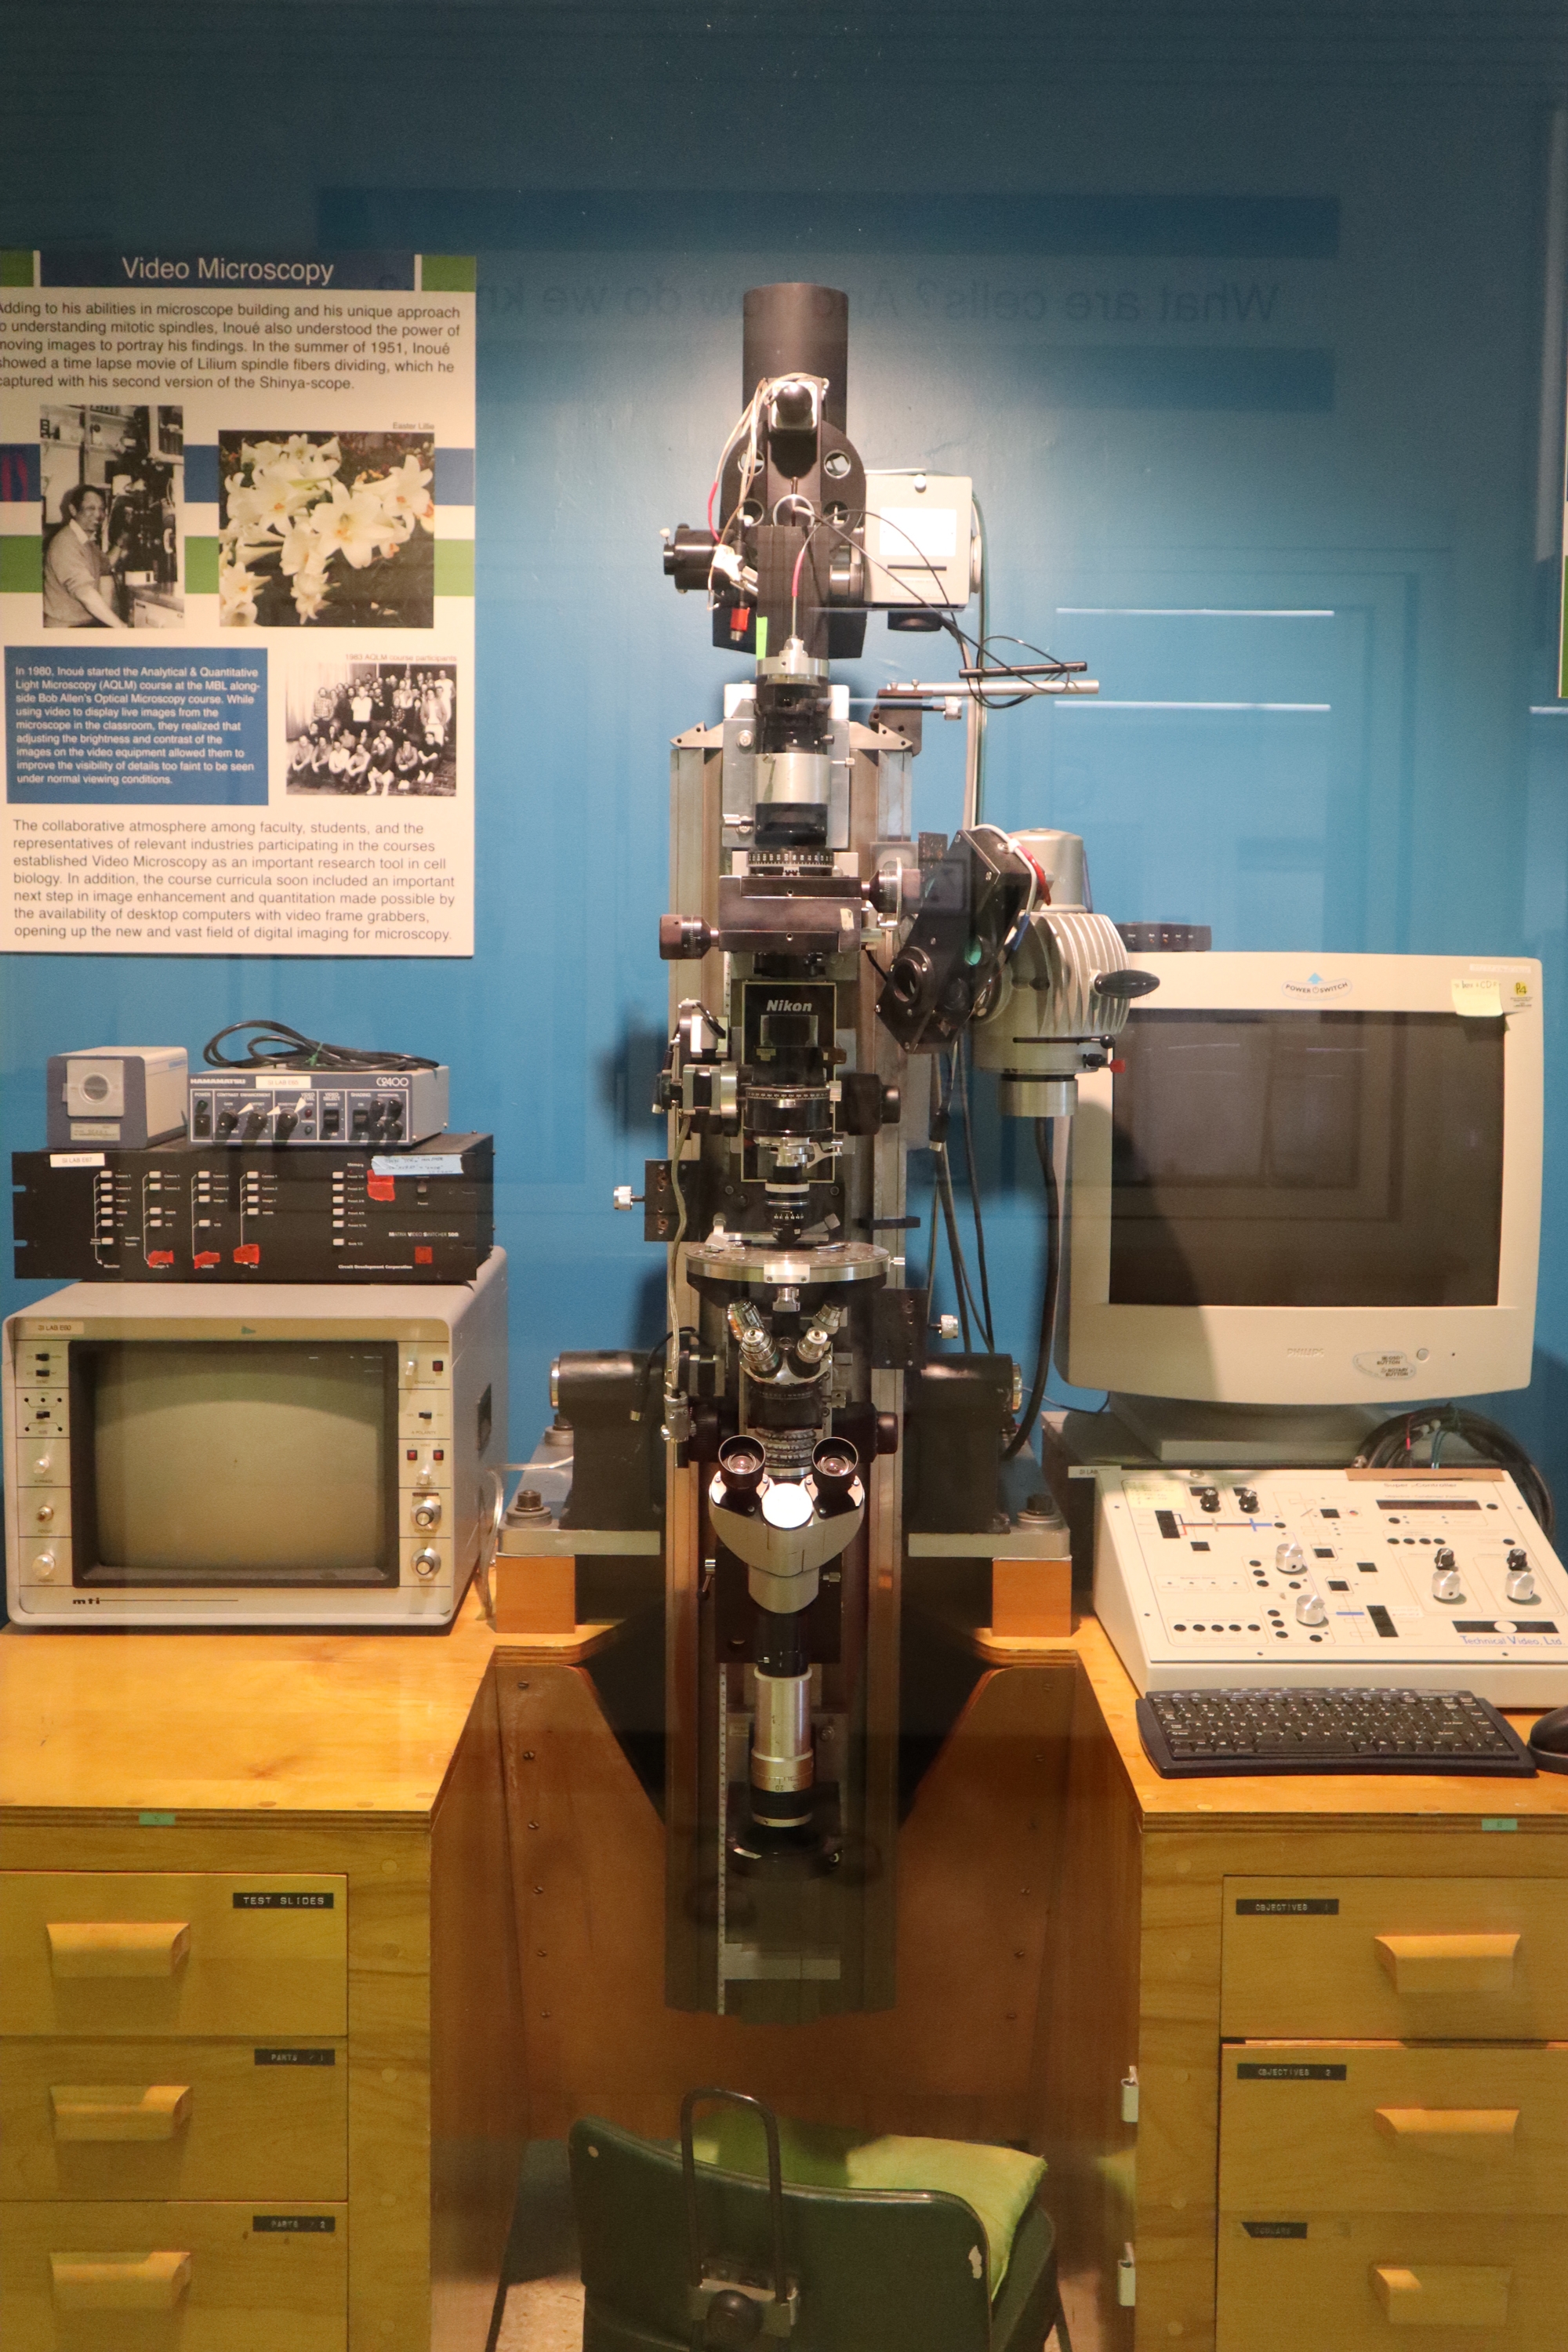 The “Seeing Life” exhibit includes an early version of the Shinyascope, designed and built by MBL Distinguished Scientist Shinya Inoué, a pioneer of live-cell and video microscopy in the mid- to late 20th century. Credit: Diana Kenney